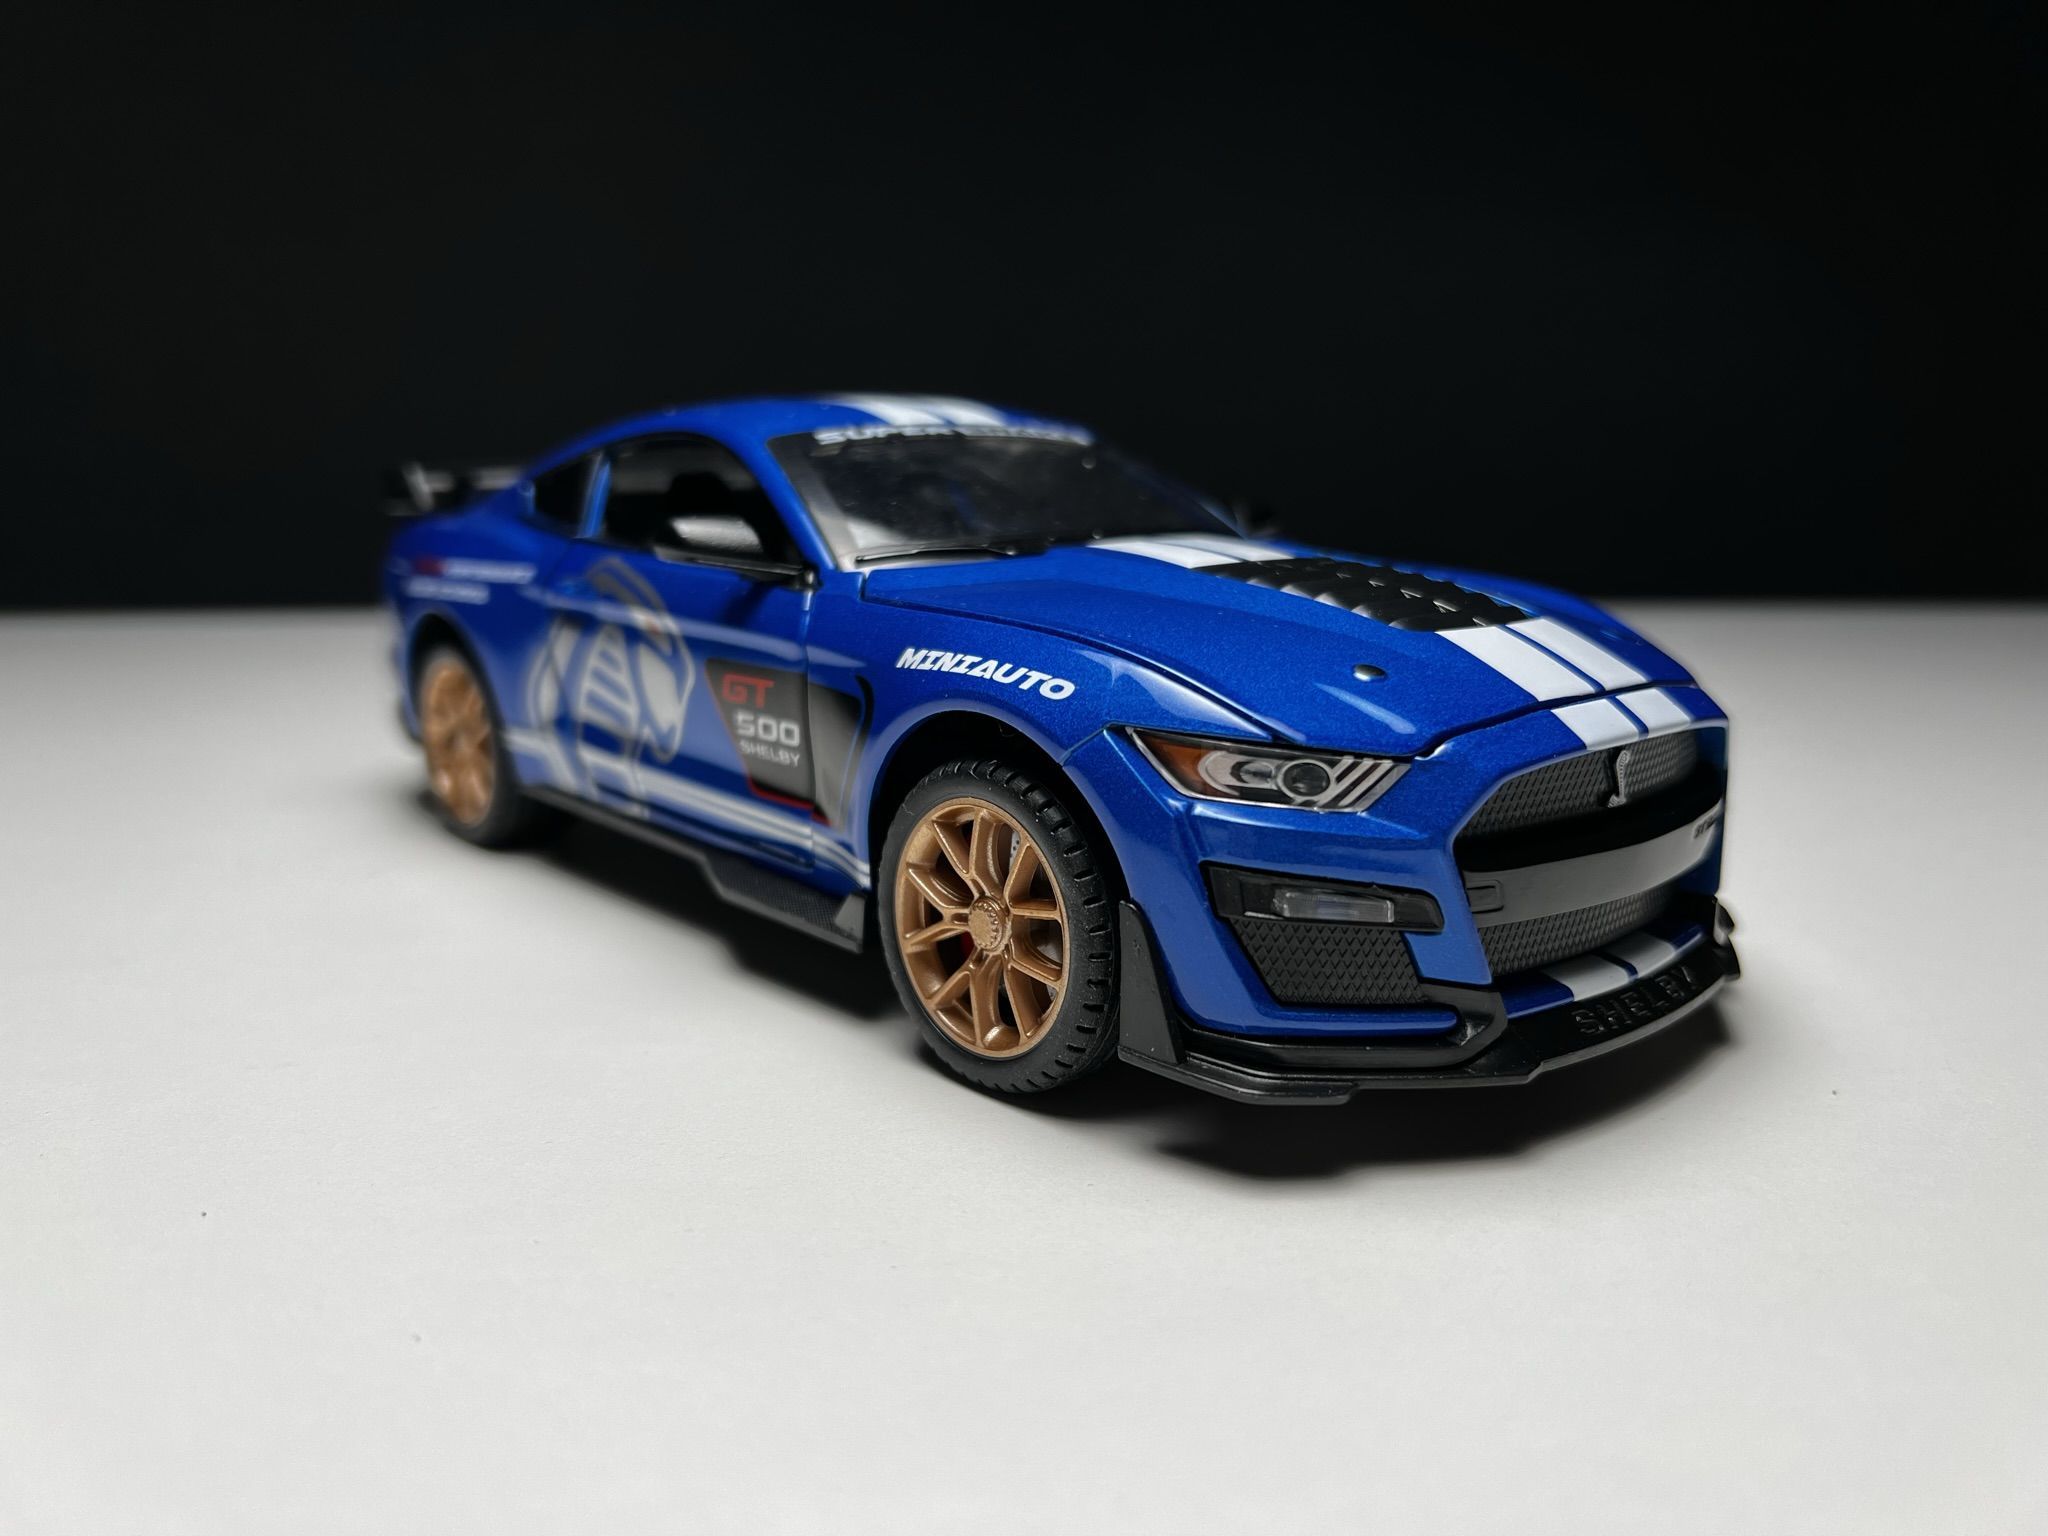 Машинка металлическая Элемент Ford Mustang Shelby 1:24 машинка металлическая элемент ford mustang shelby 1 24